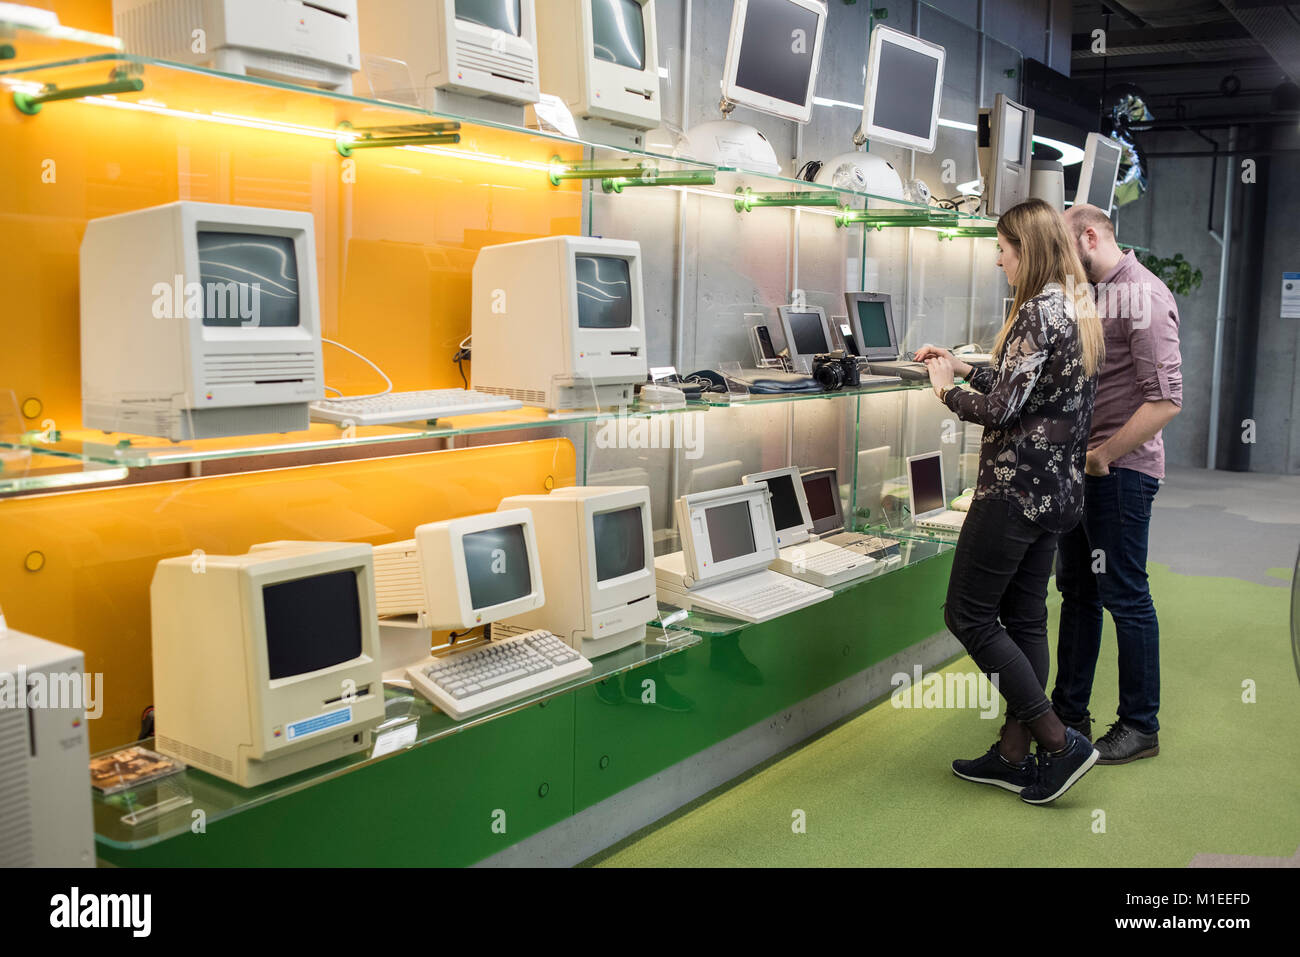 Macintosh models exhibited at MacPaw's Ukrainian Apple Museum in Kiev, Ukraine on January 26, 2017. Ukrainian developer MacPaw has opened Apple hardware museum at the company’s office in Kiev. The collection has more than 70 original Macintosh models dated from 1981 to 2017. Stock Photo